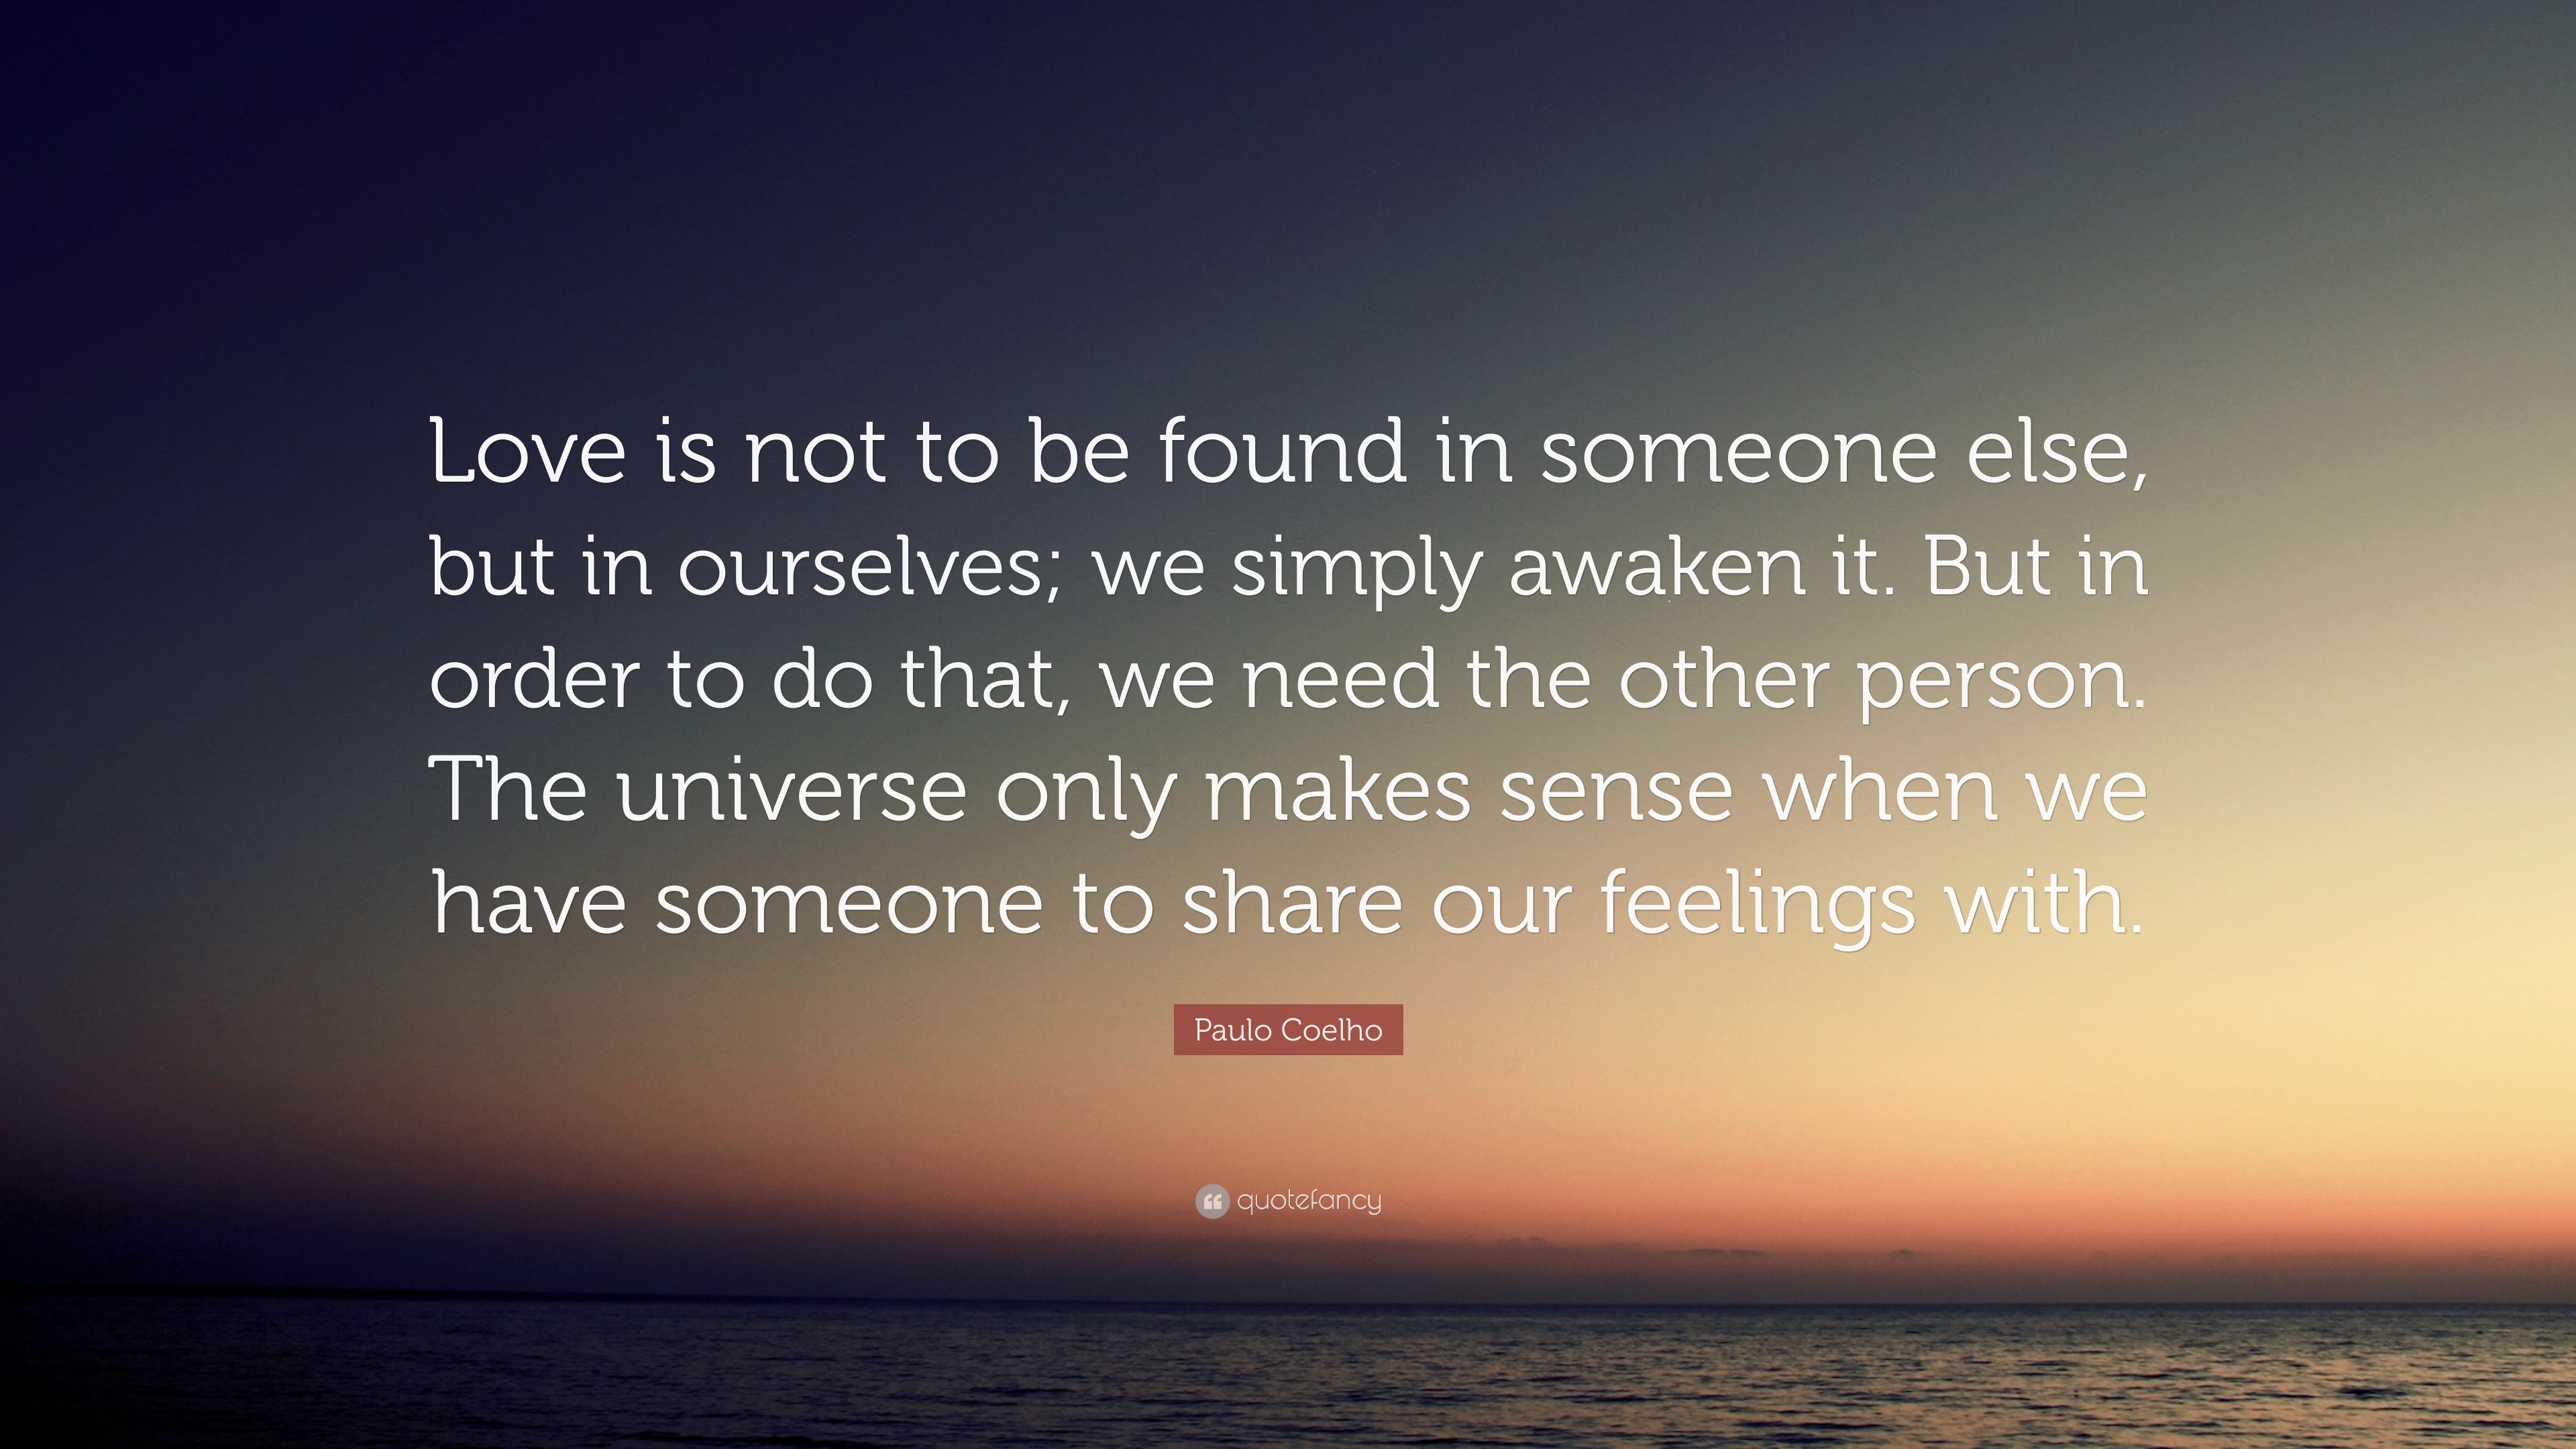 Paulo Coelho Quote “Love is not to be found in someone else but